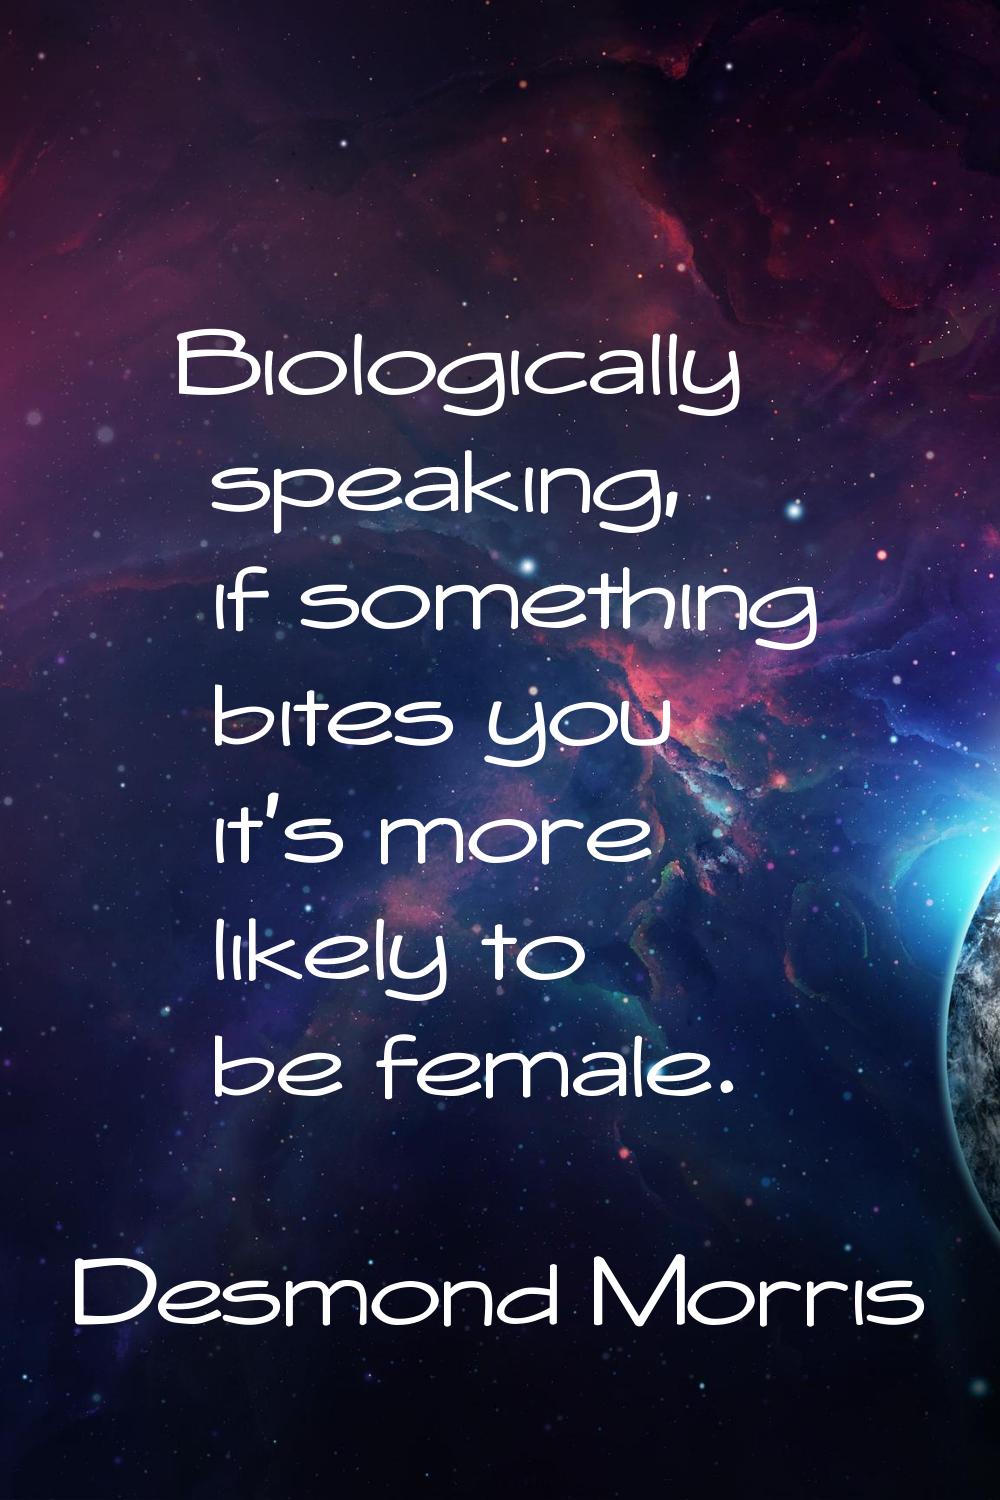 Biologically speaking, if something bites you it's more likely to be female.